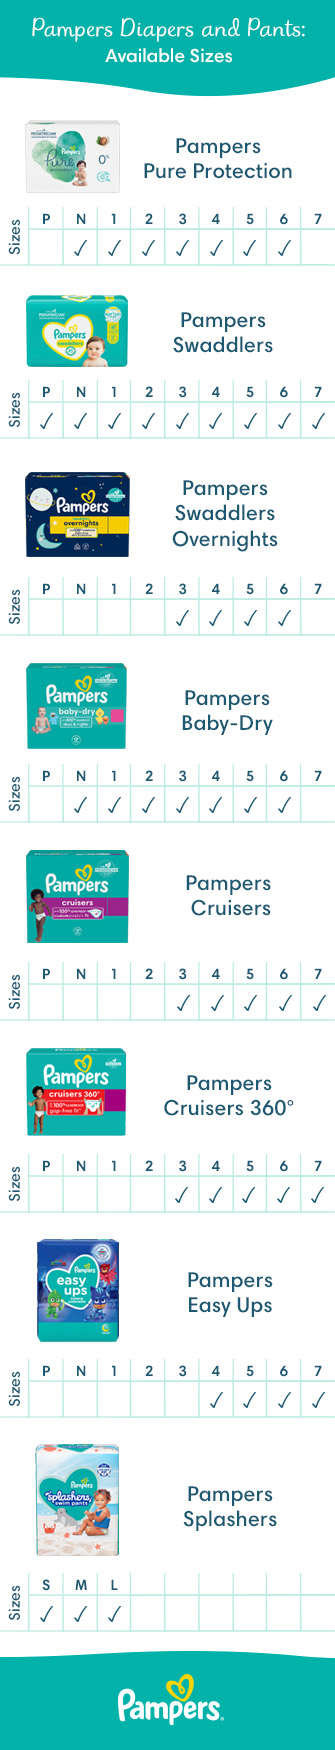 pampers size 1 weight